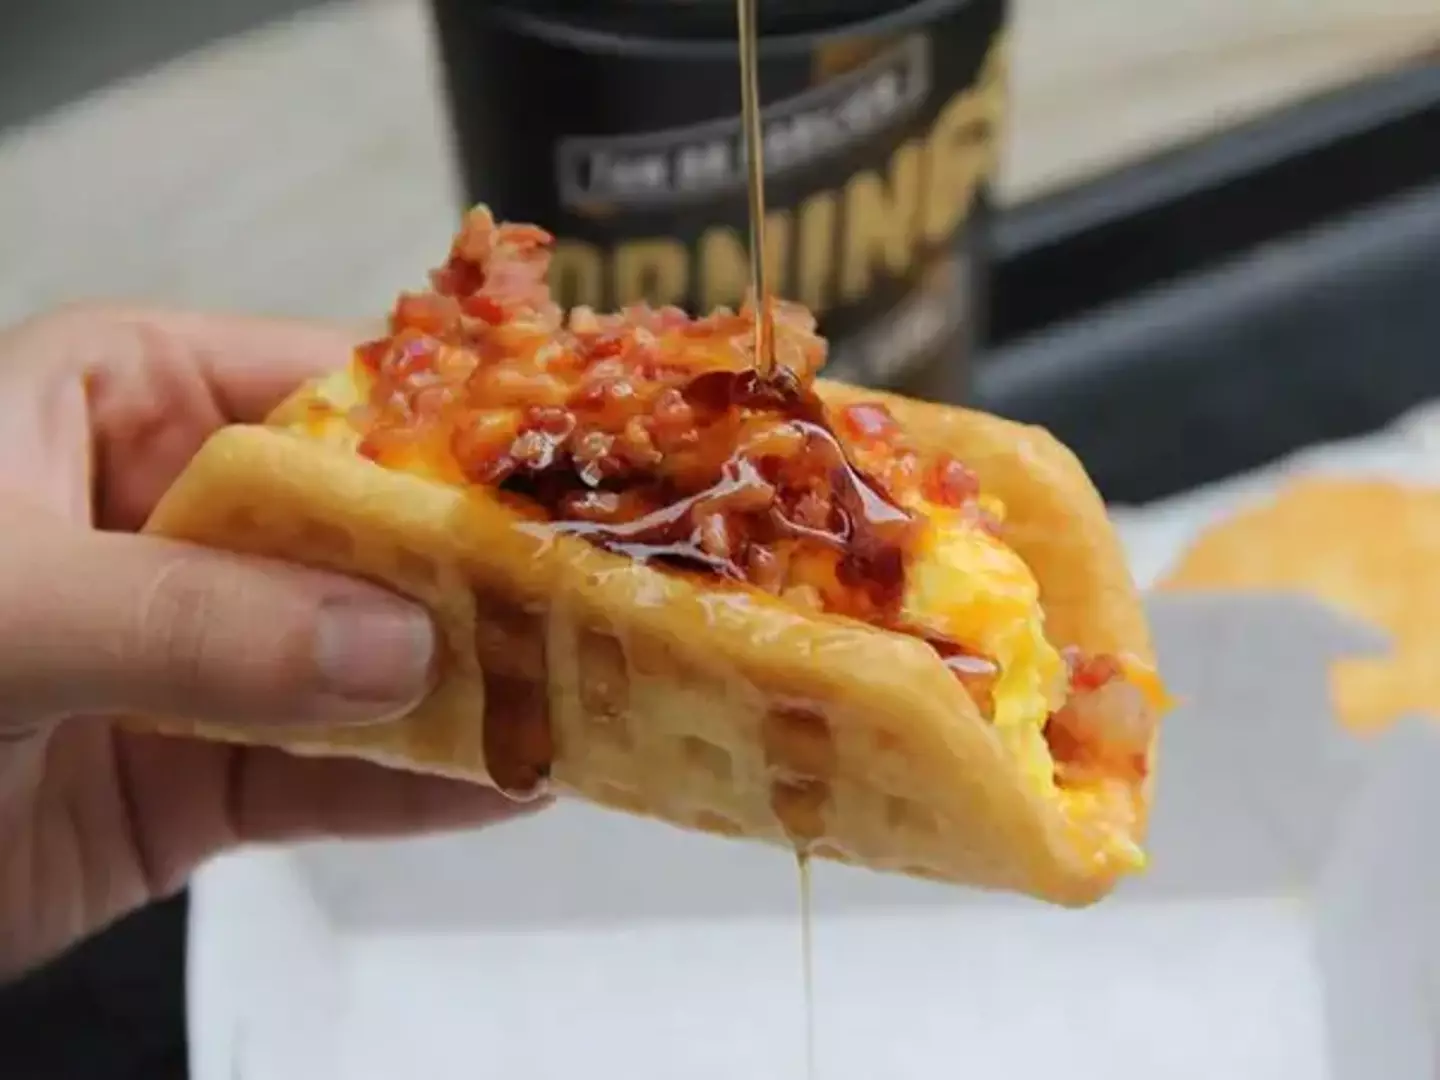 Taco Bell's now-discontinued Waffle Taco.